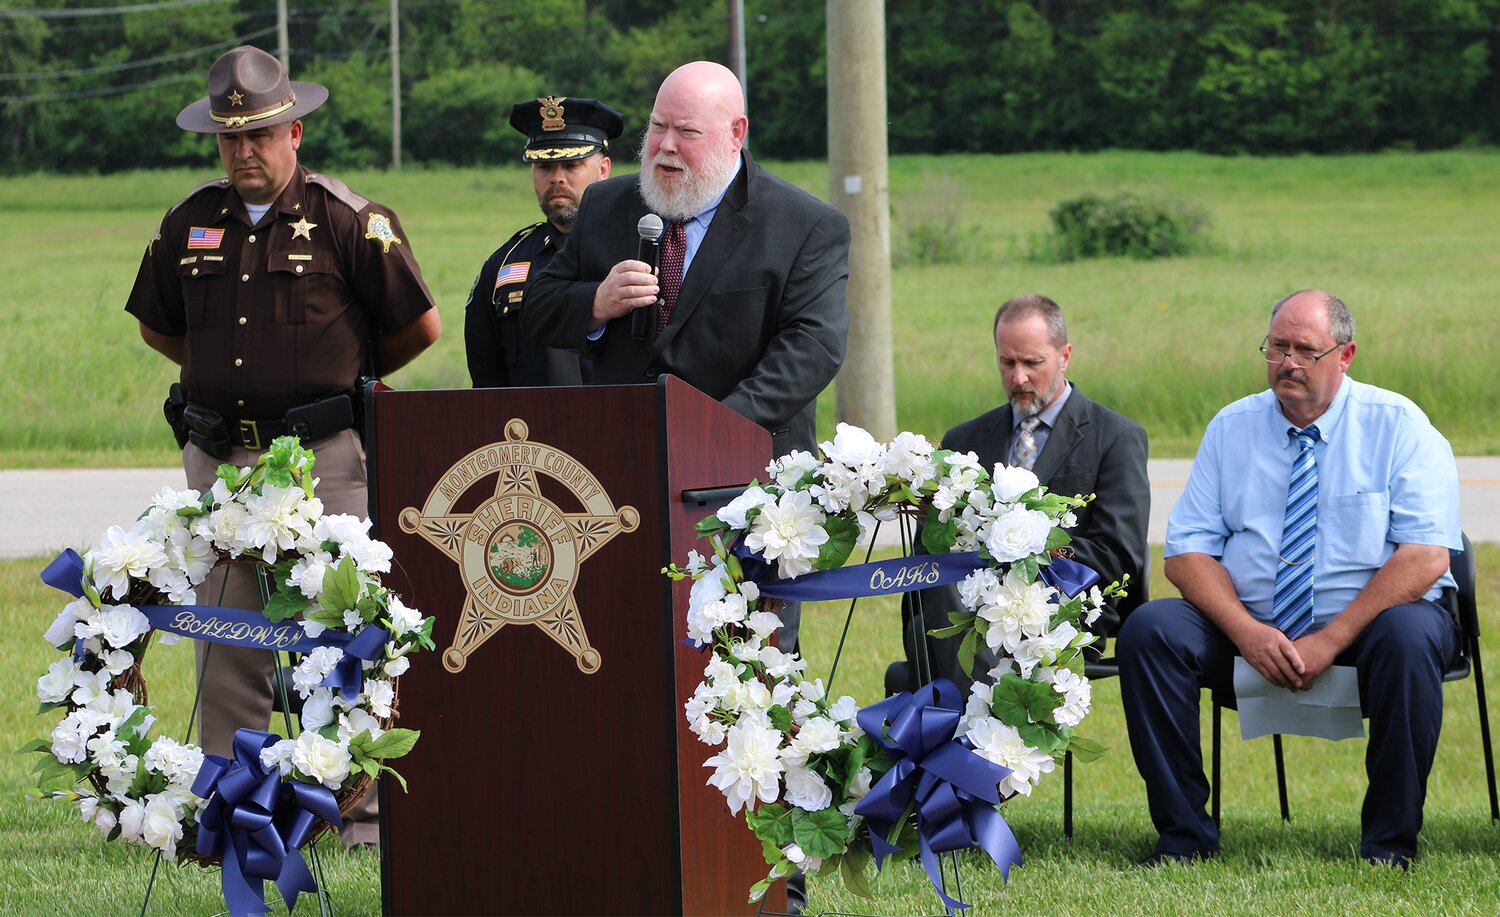 CPD Chaplain Alan Goff welcomes the crowd who gathered for the Police Week Memorial ceremony on Wednesday.